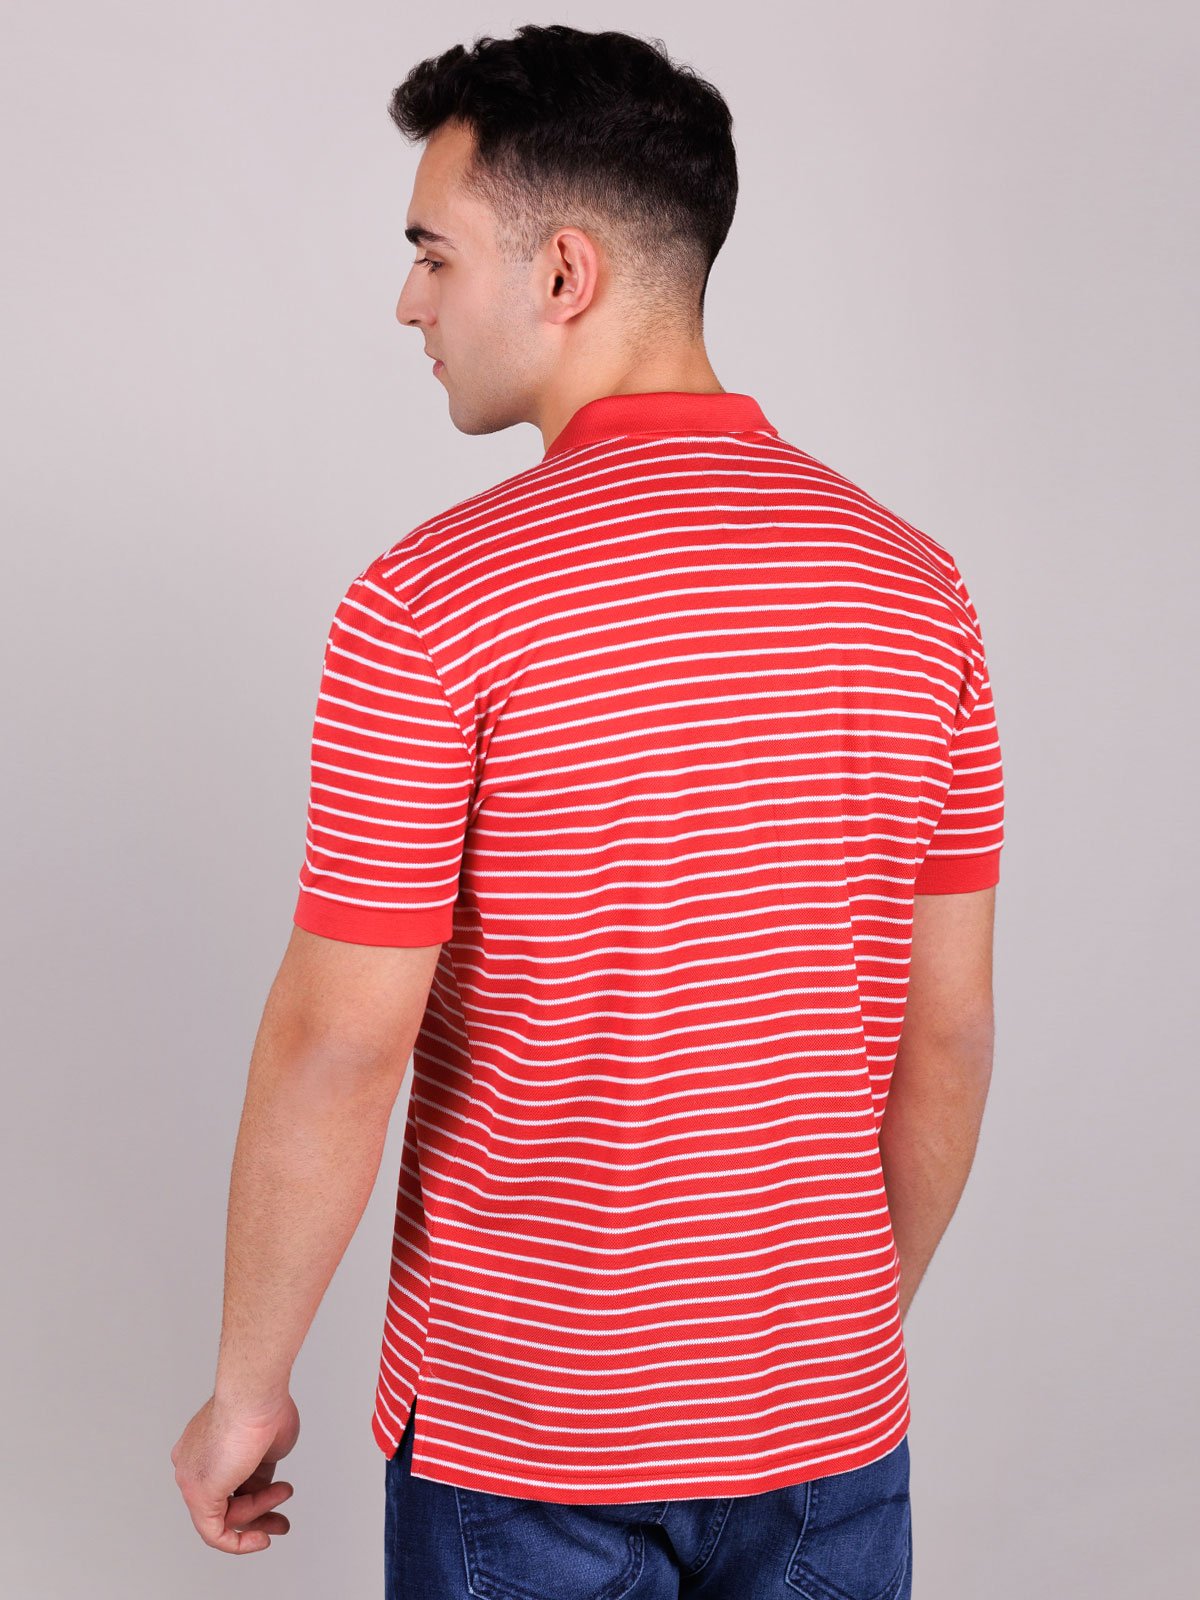 Tshirt in coral with white stripe - 93417 € 38.24 img4